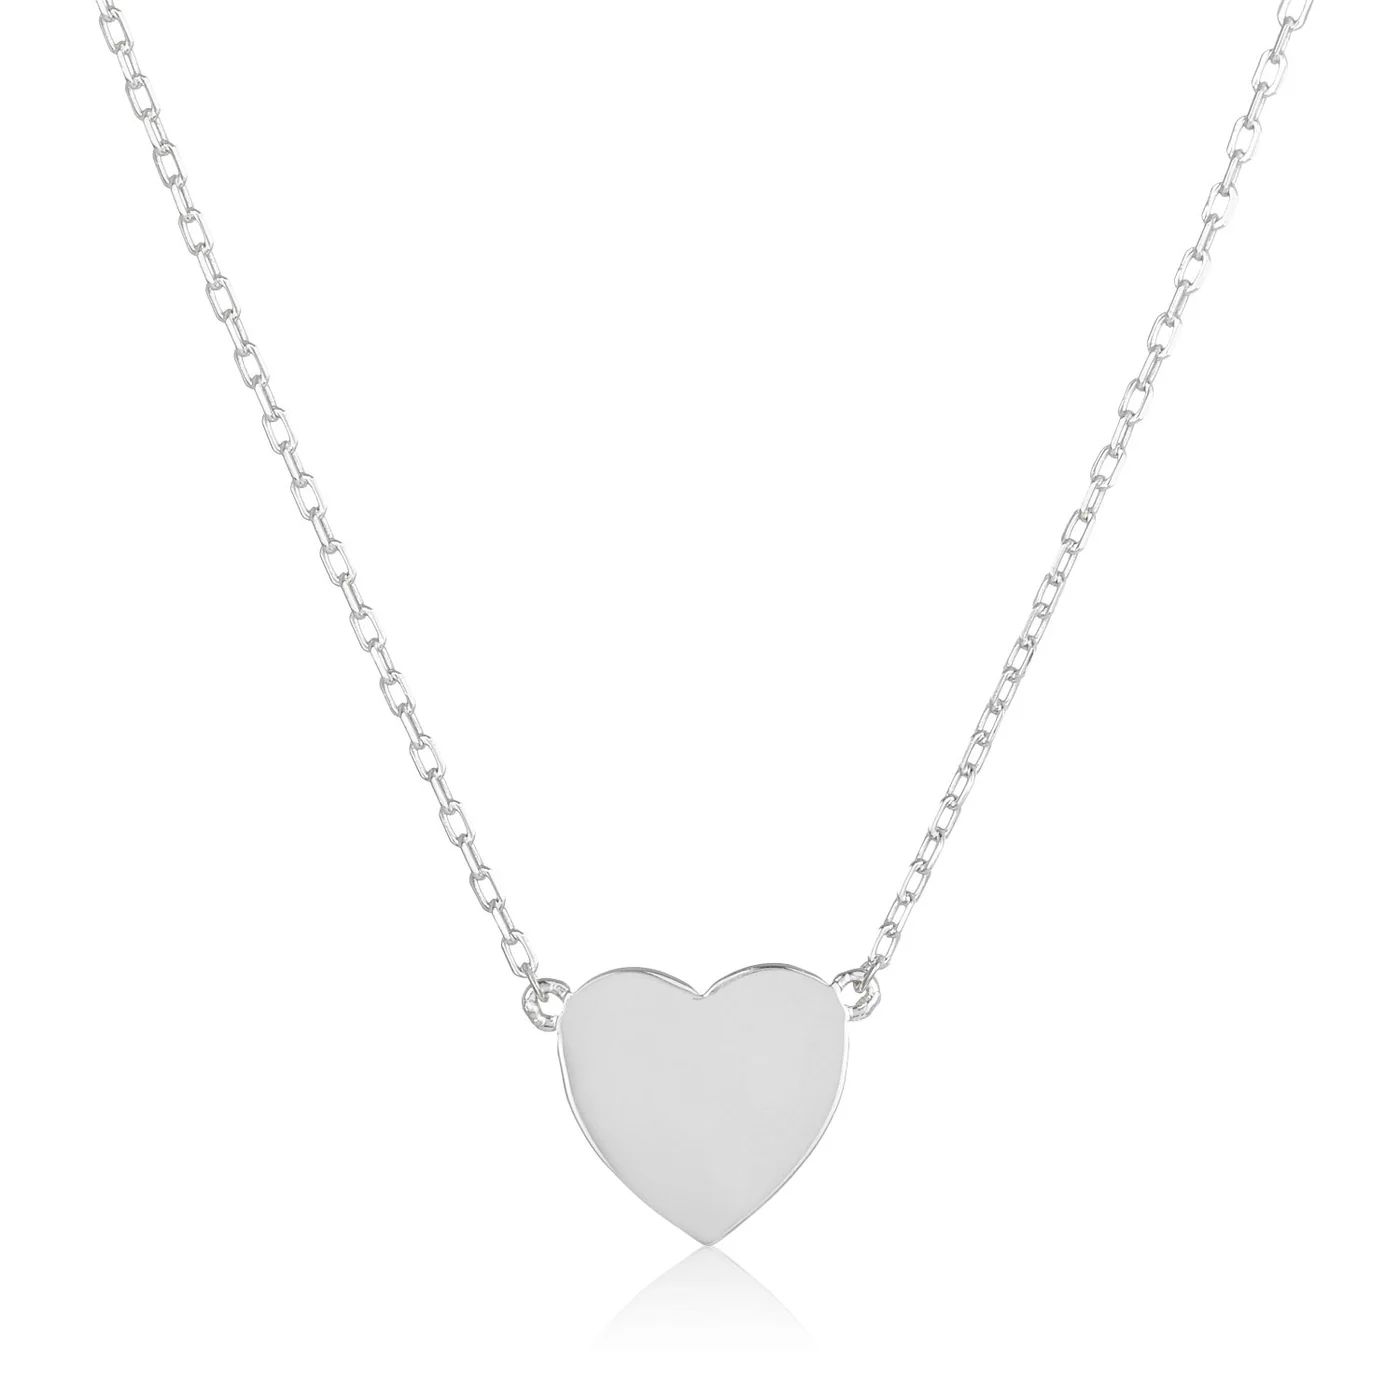 "You Have My Baby Heart" Necklace | Melinda Maria